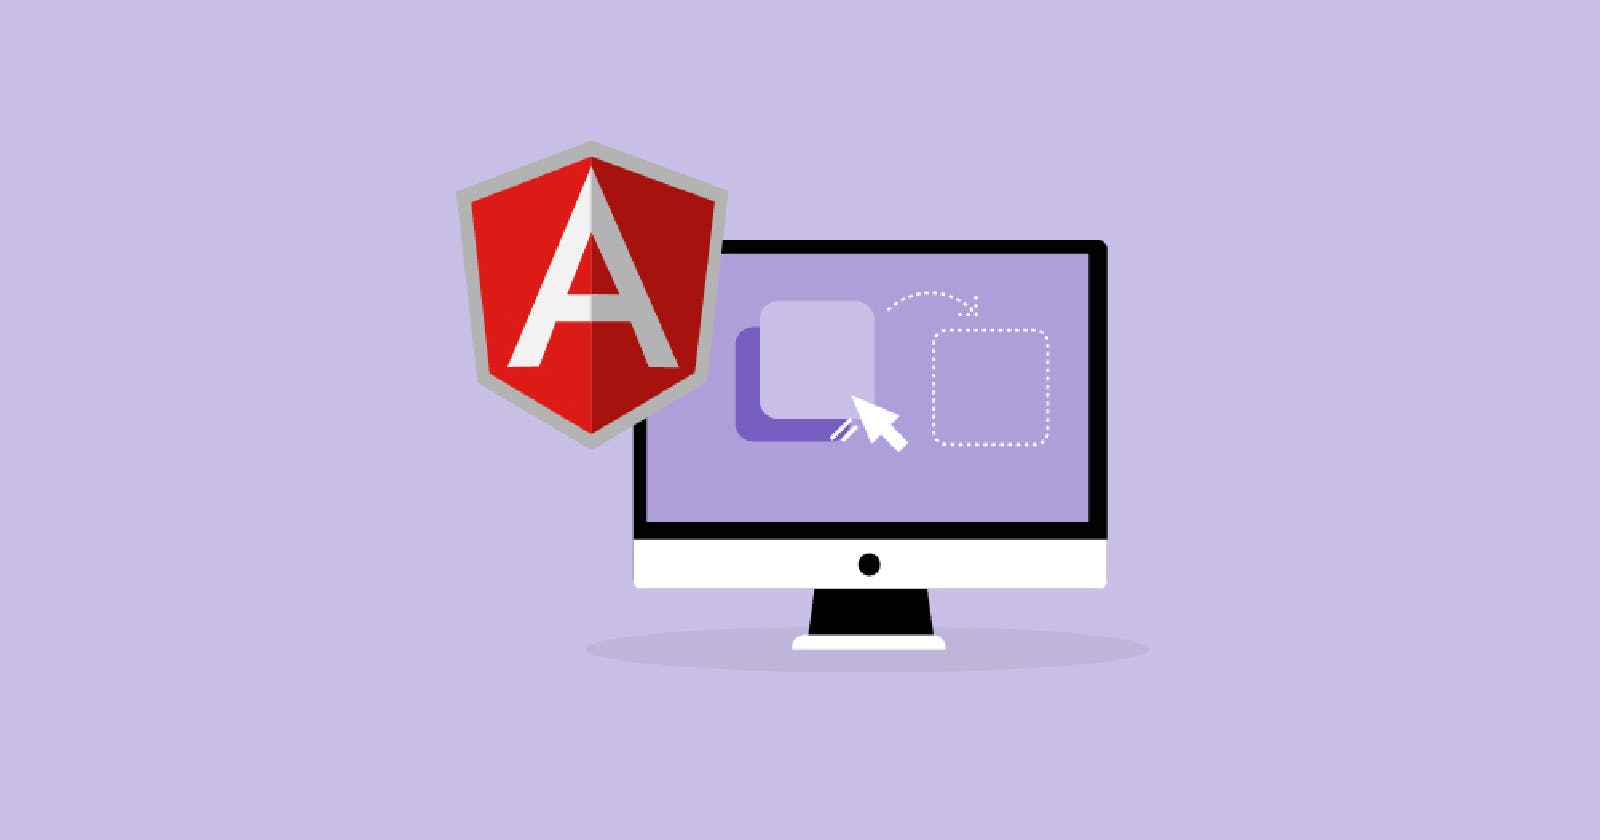 How To Build an Angular App with Drag and Drop